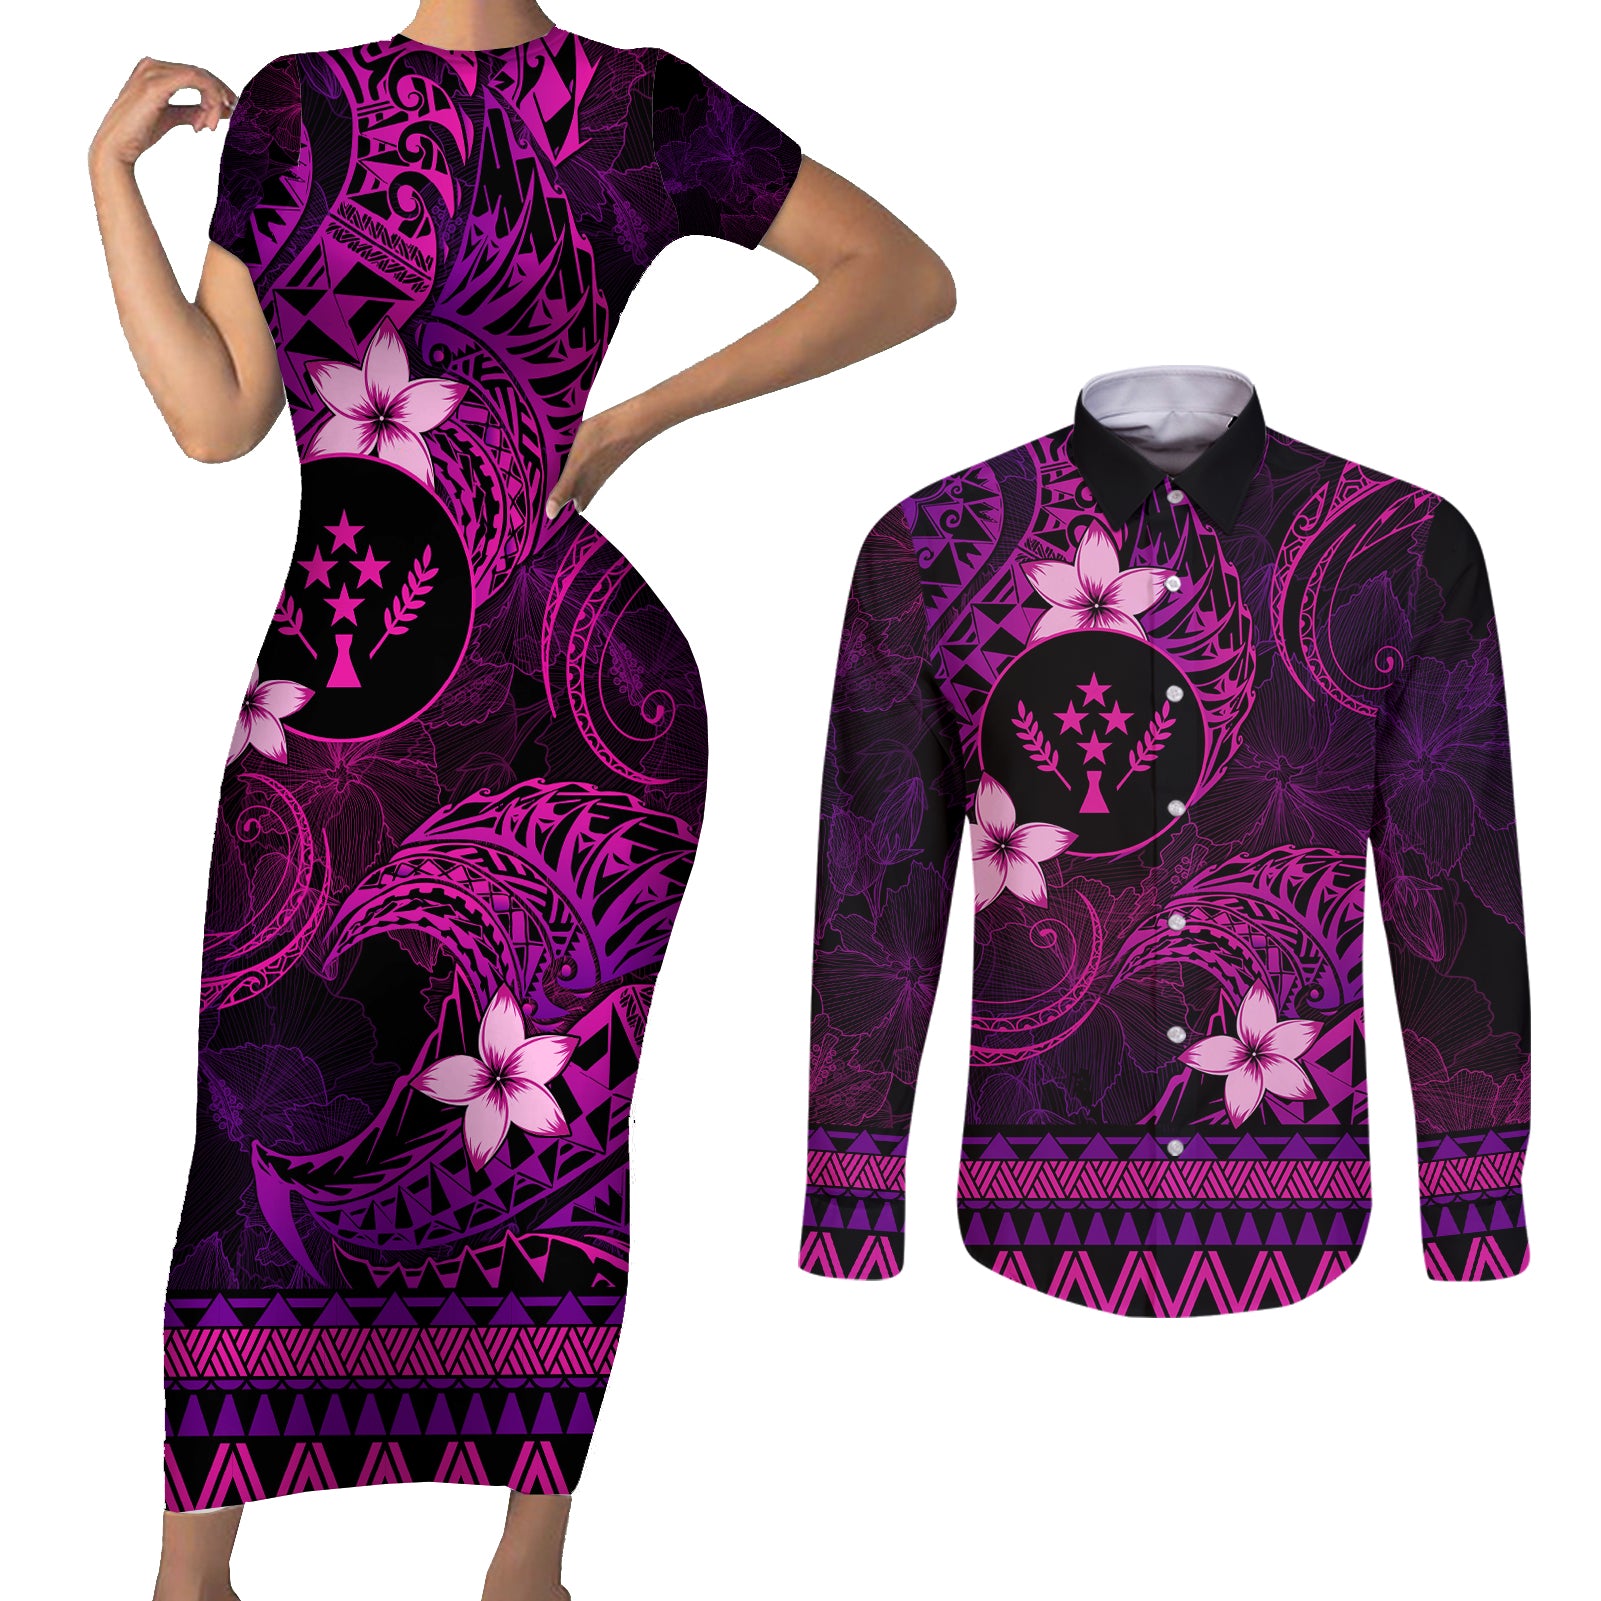 FSM Kosrae State Couples Matching Short Sleeve Bodycon Dress and Long Sleeve Button Shirt Tribal Pattern Pink Version LT01 Pink - Polynesian Pride